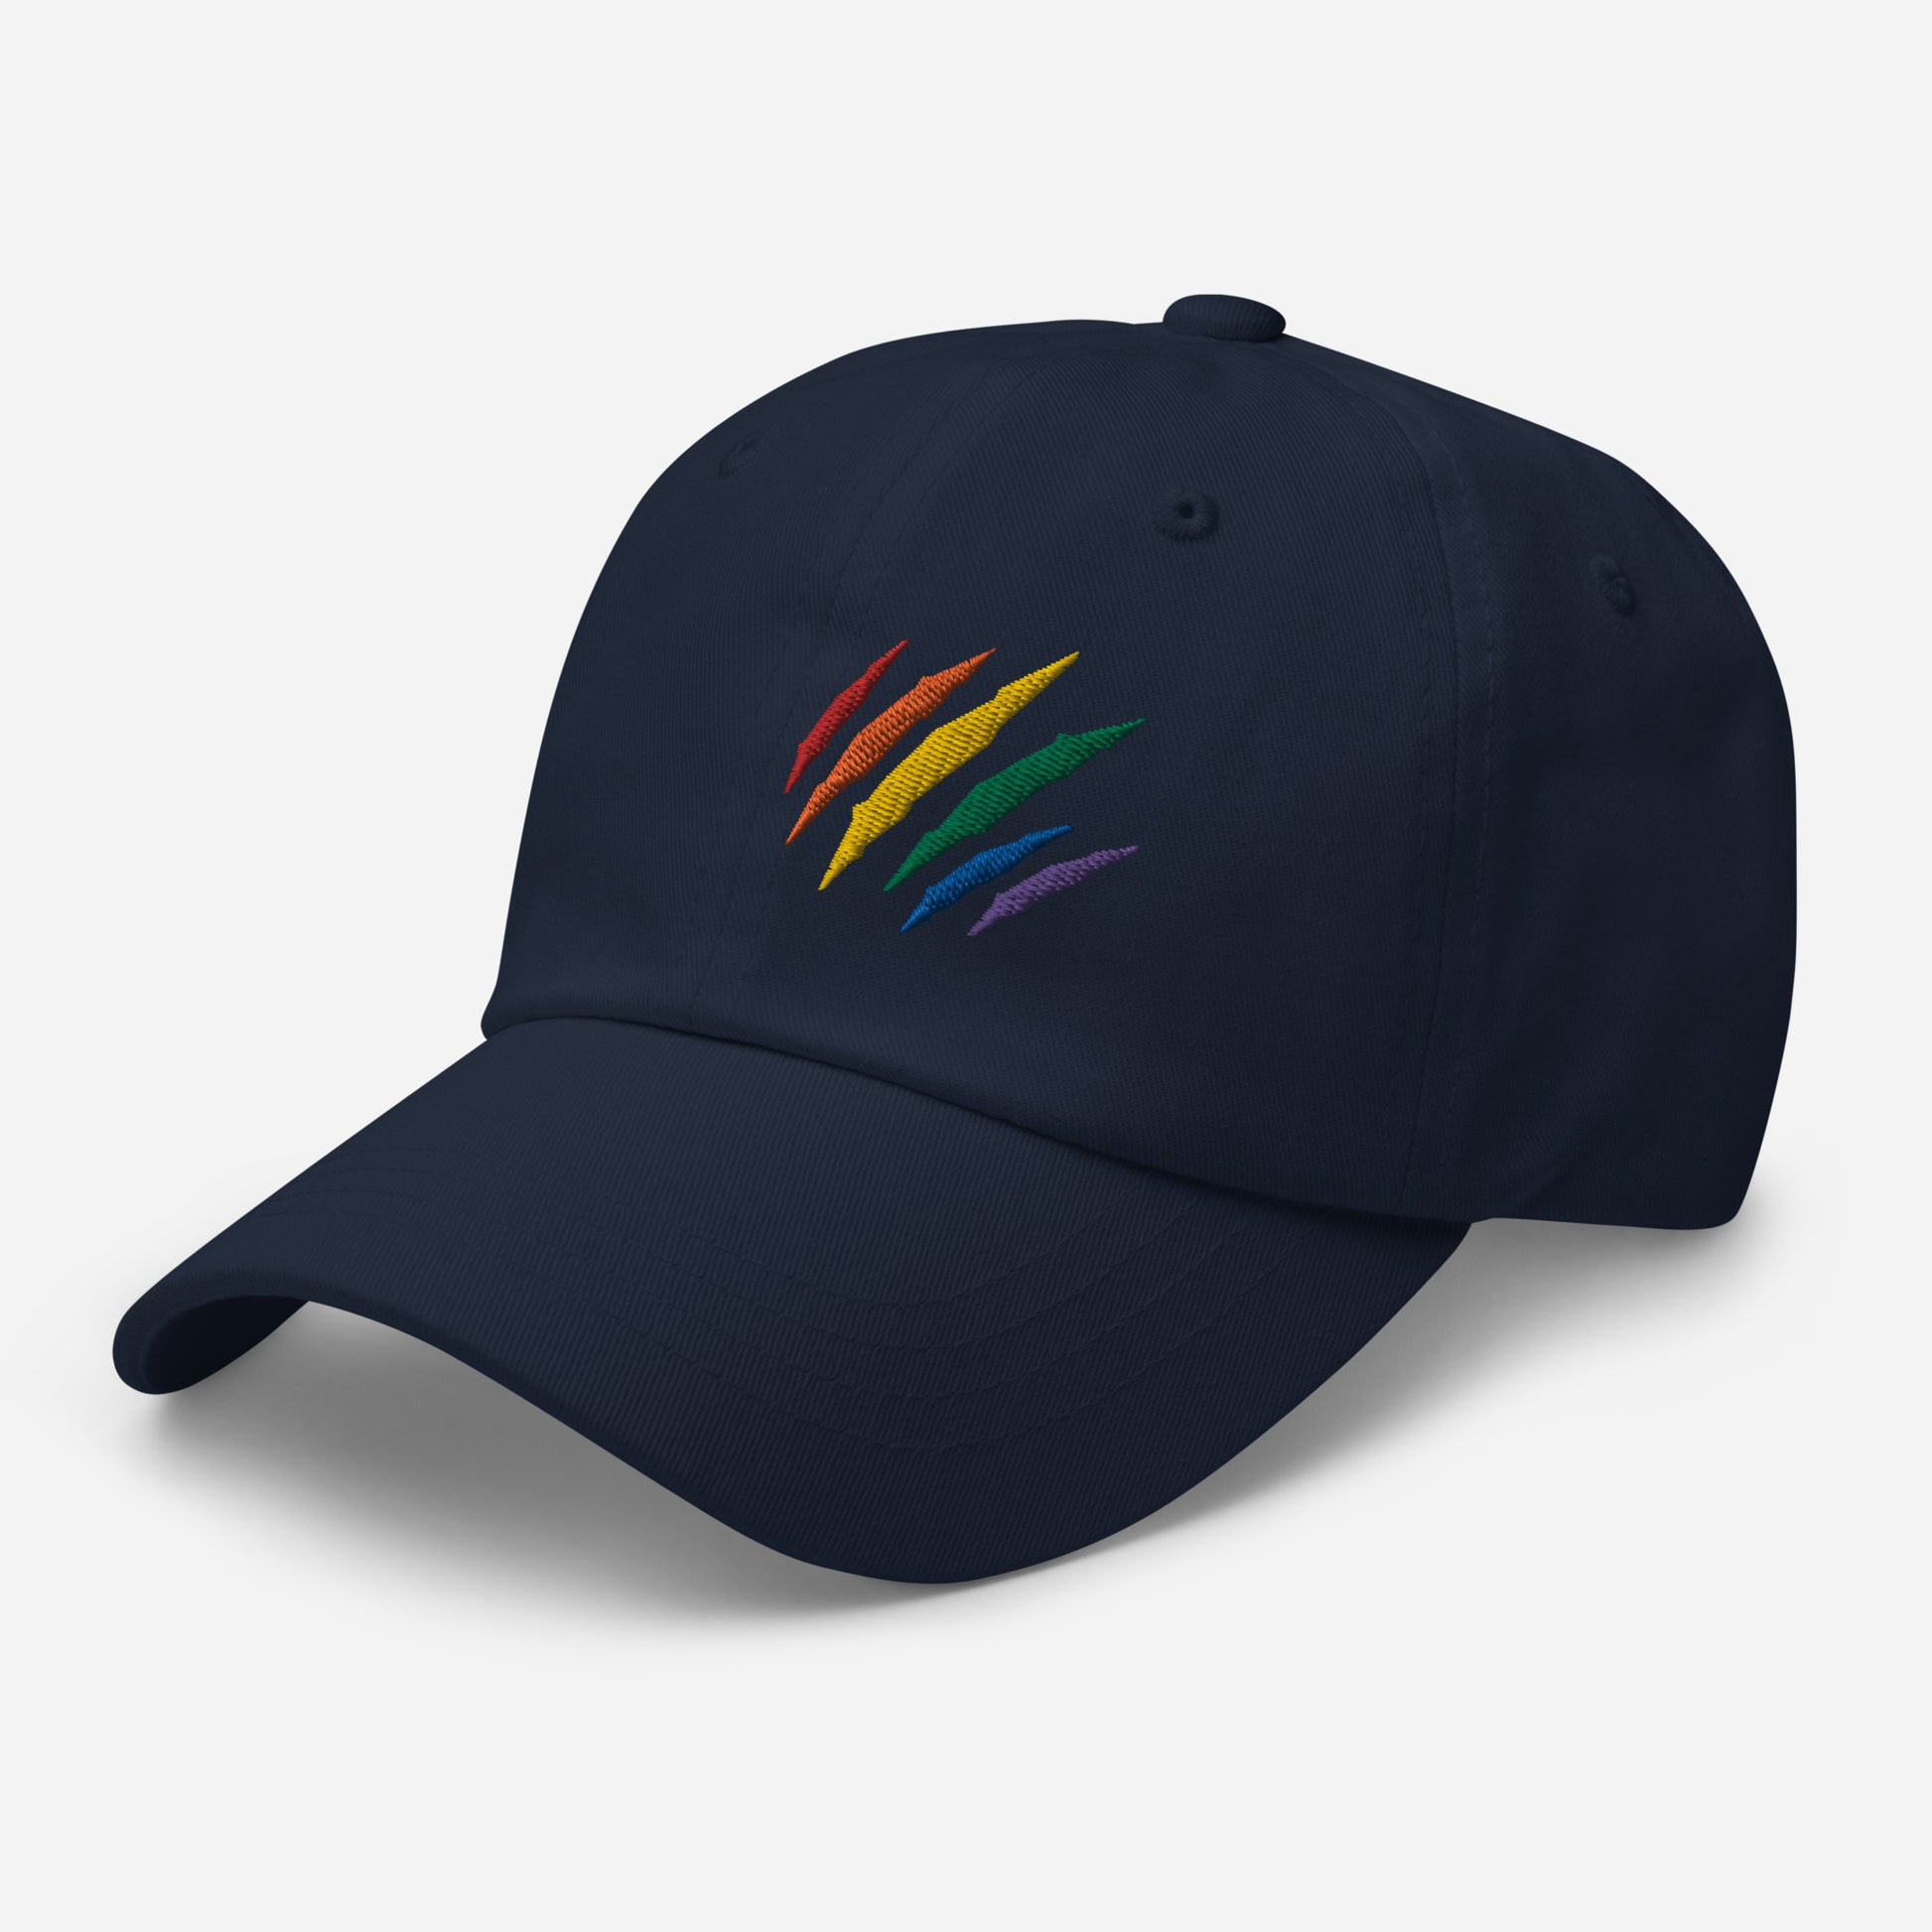 Navy baseball hat featuring rainbow pride scratch mark embroidery with a low profile, adjustable strap.